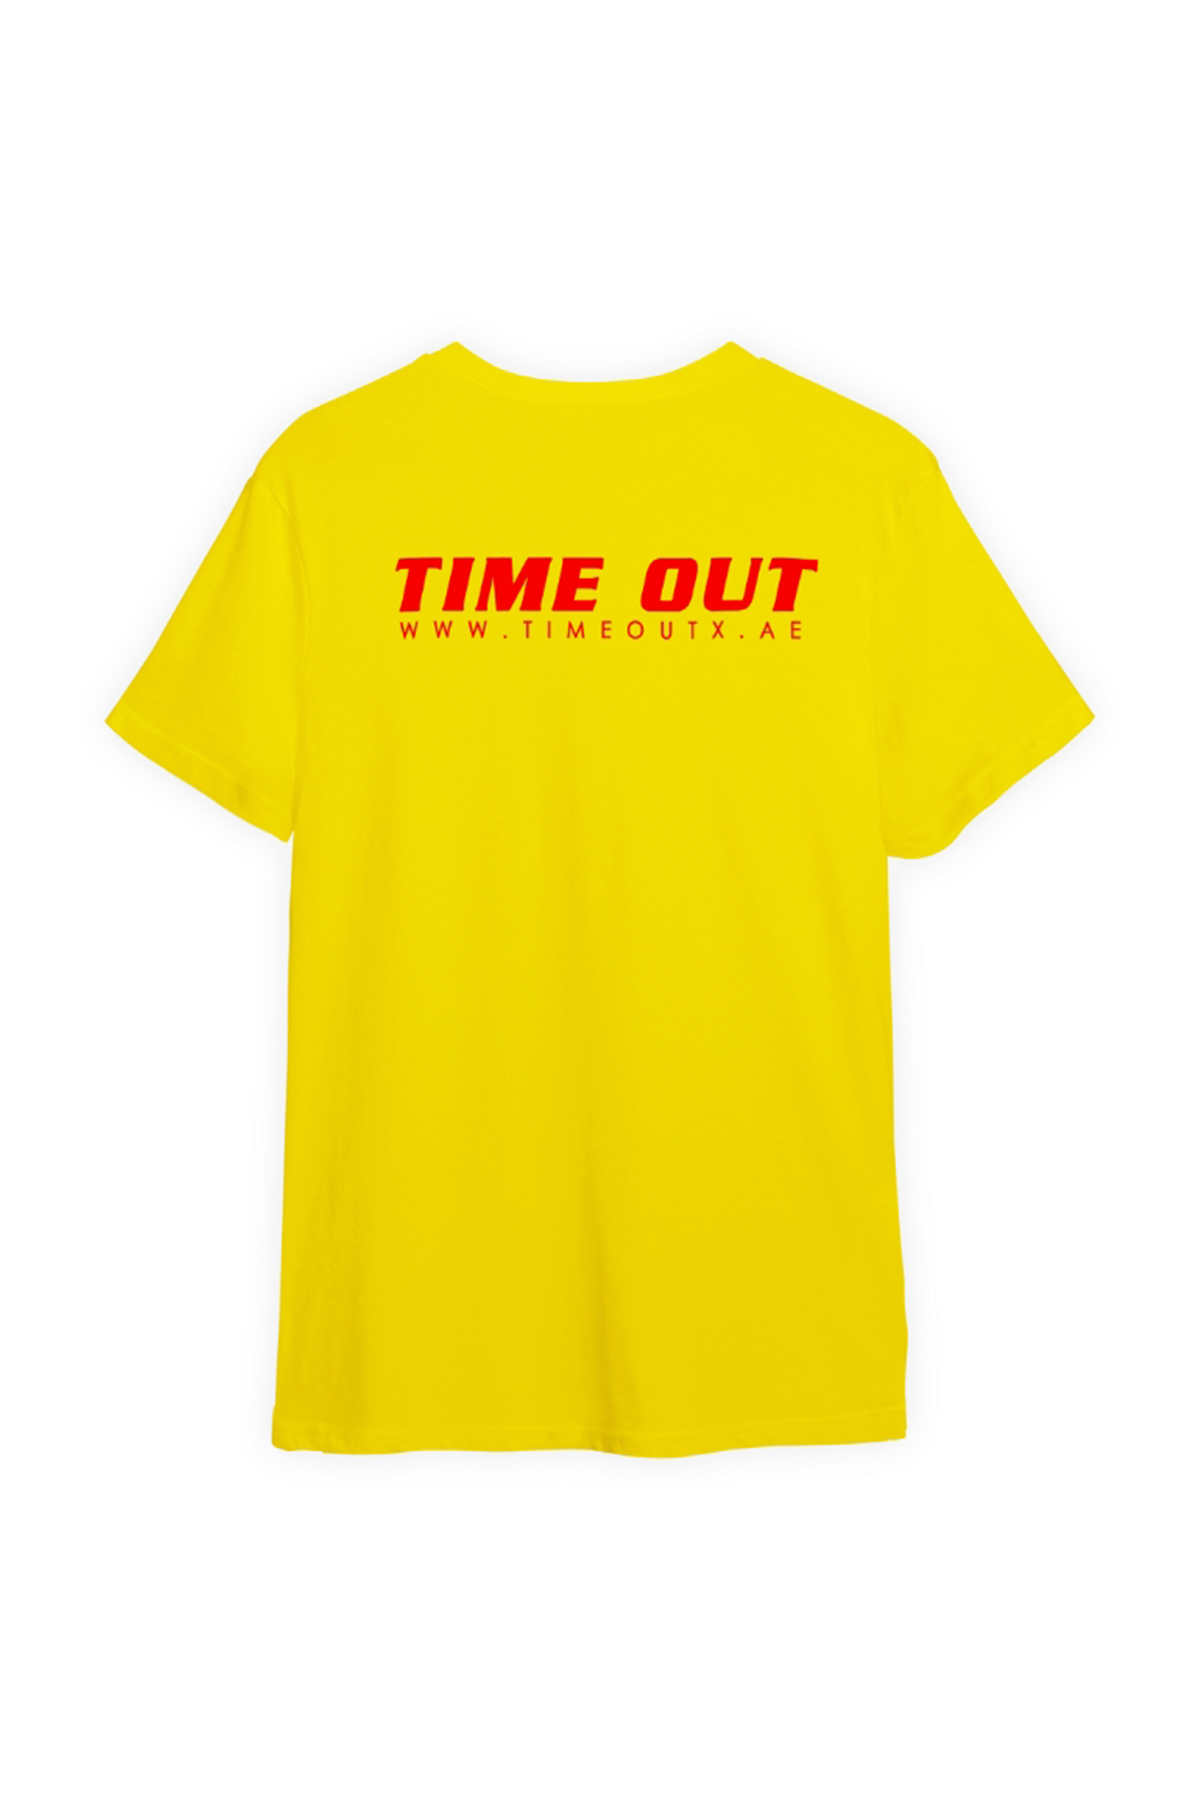 Time-Out-X-Signature-Men’s-Cotton-Gym-Tee—Yellow—Back